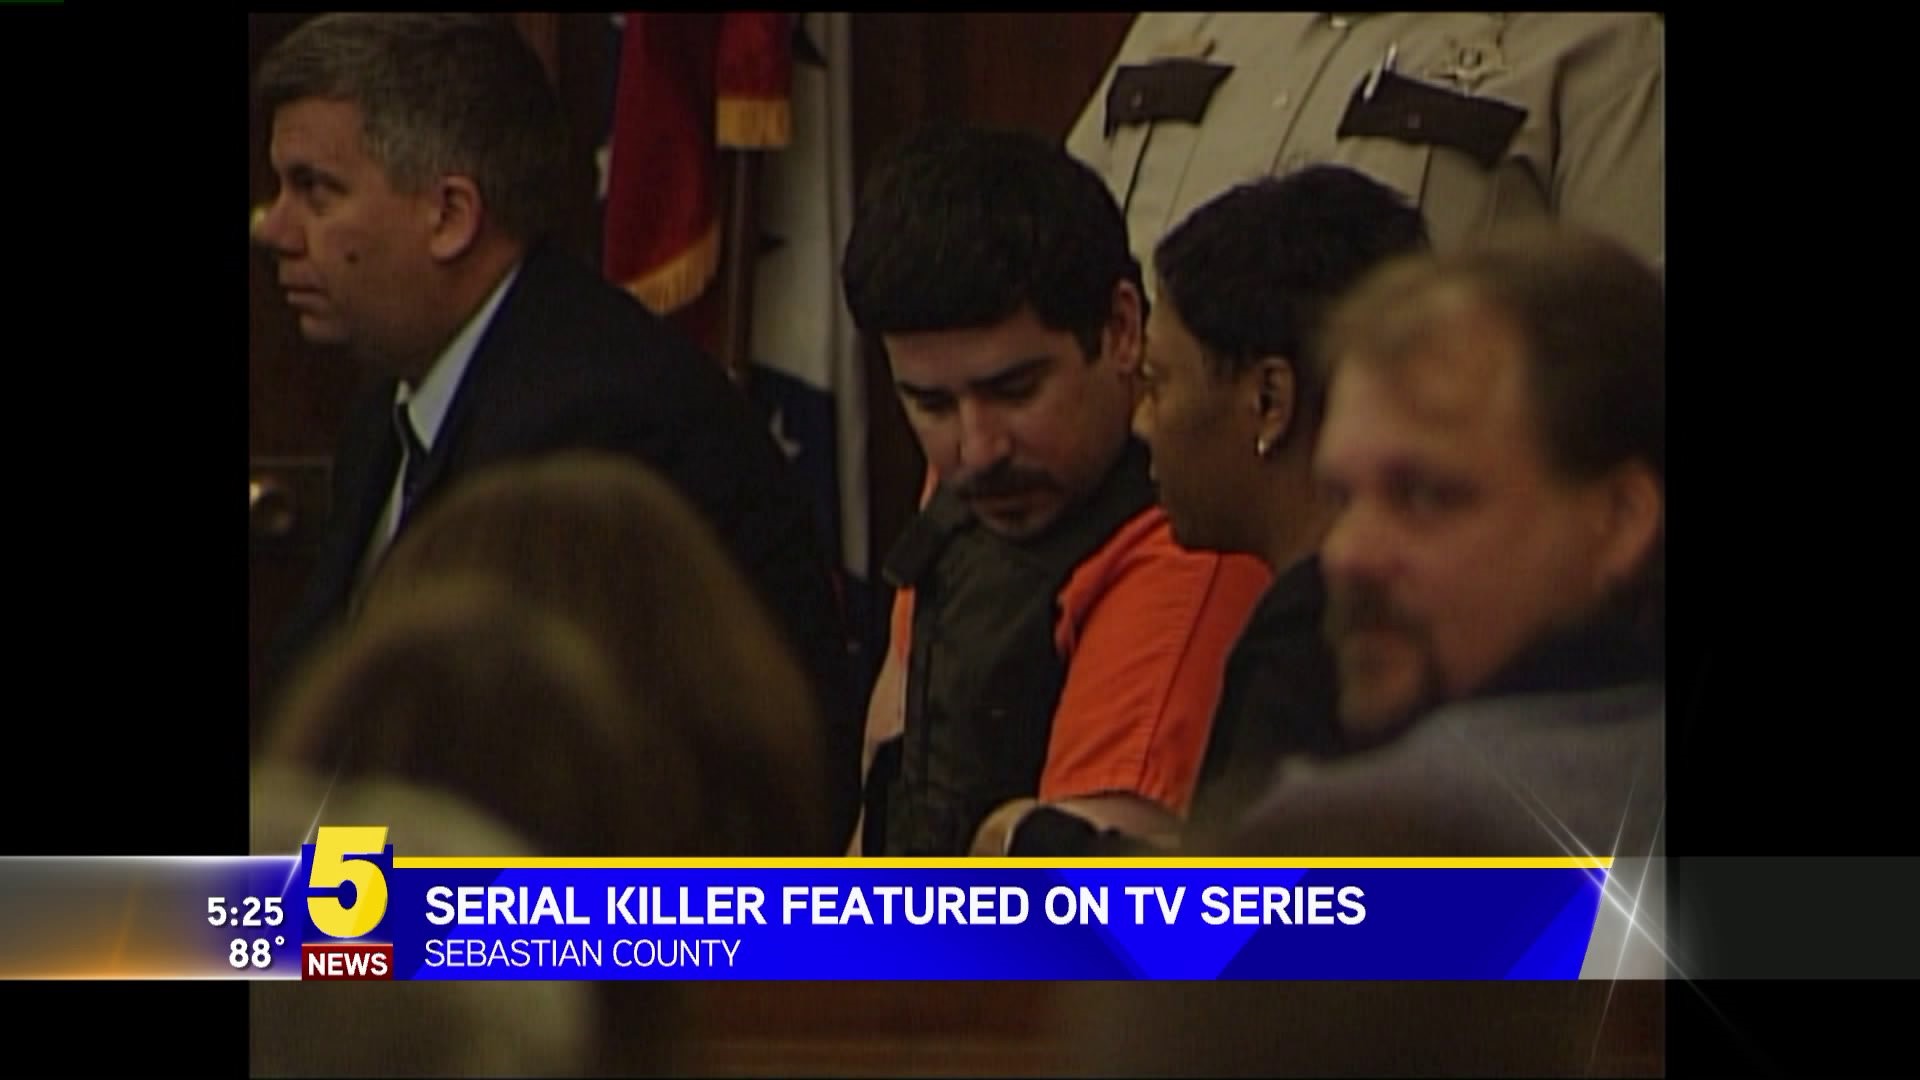 Serial Killer Featured On TV Series